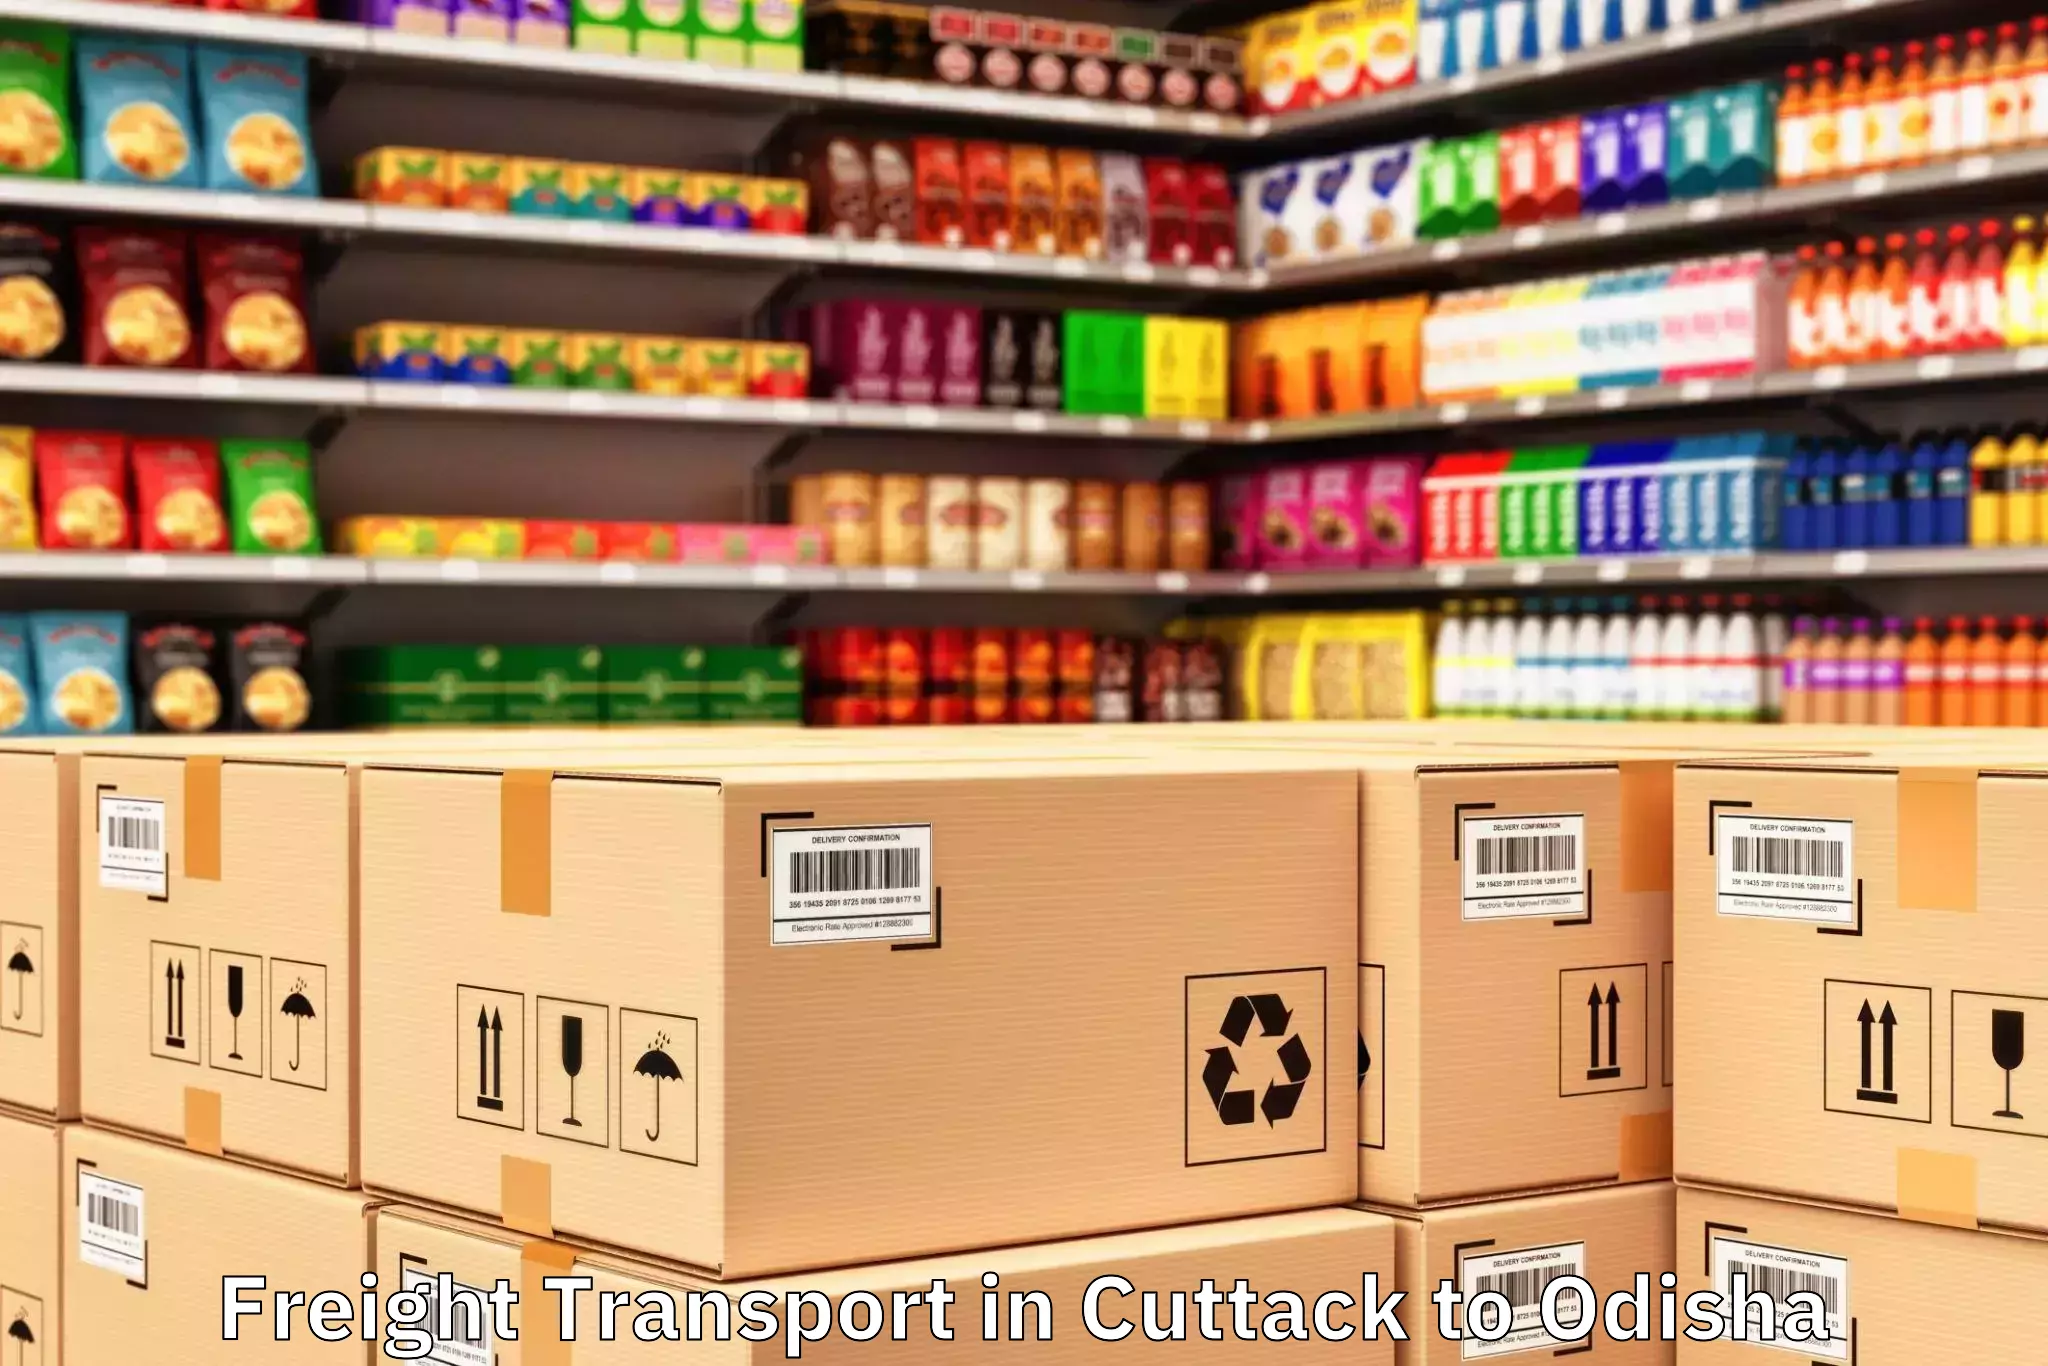 Trusted Cuttack to Odisha Freight Transport